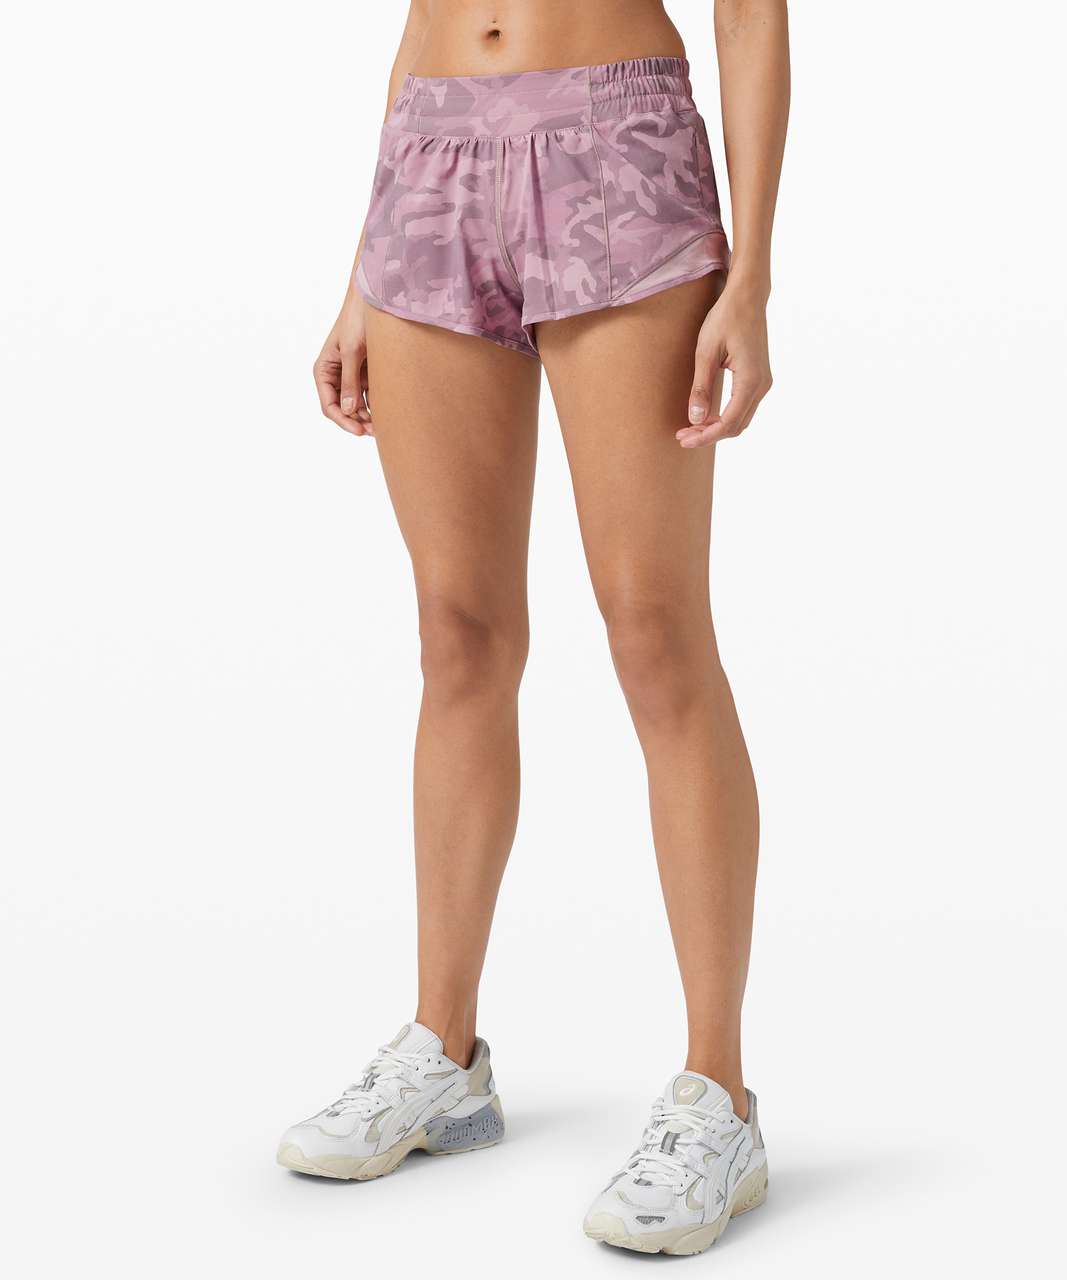 Lululemon Hotty Hot Short II *2.5" - Incognito Camo Pink Taupe Multi / Pink Taupe